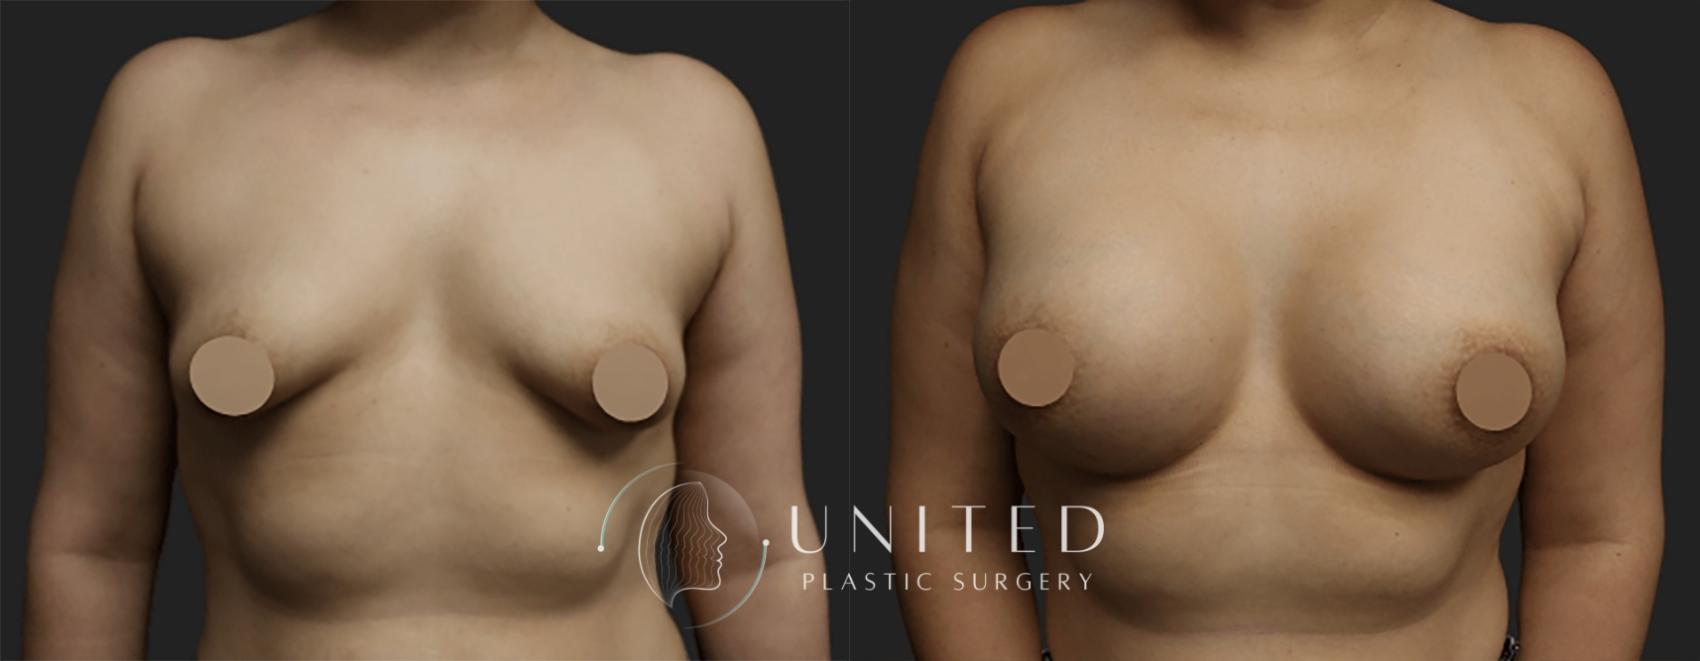 Before & After Breast Augmentation Case 5 Front View in Newport Beach, Temecula, & Orange County, California